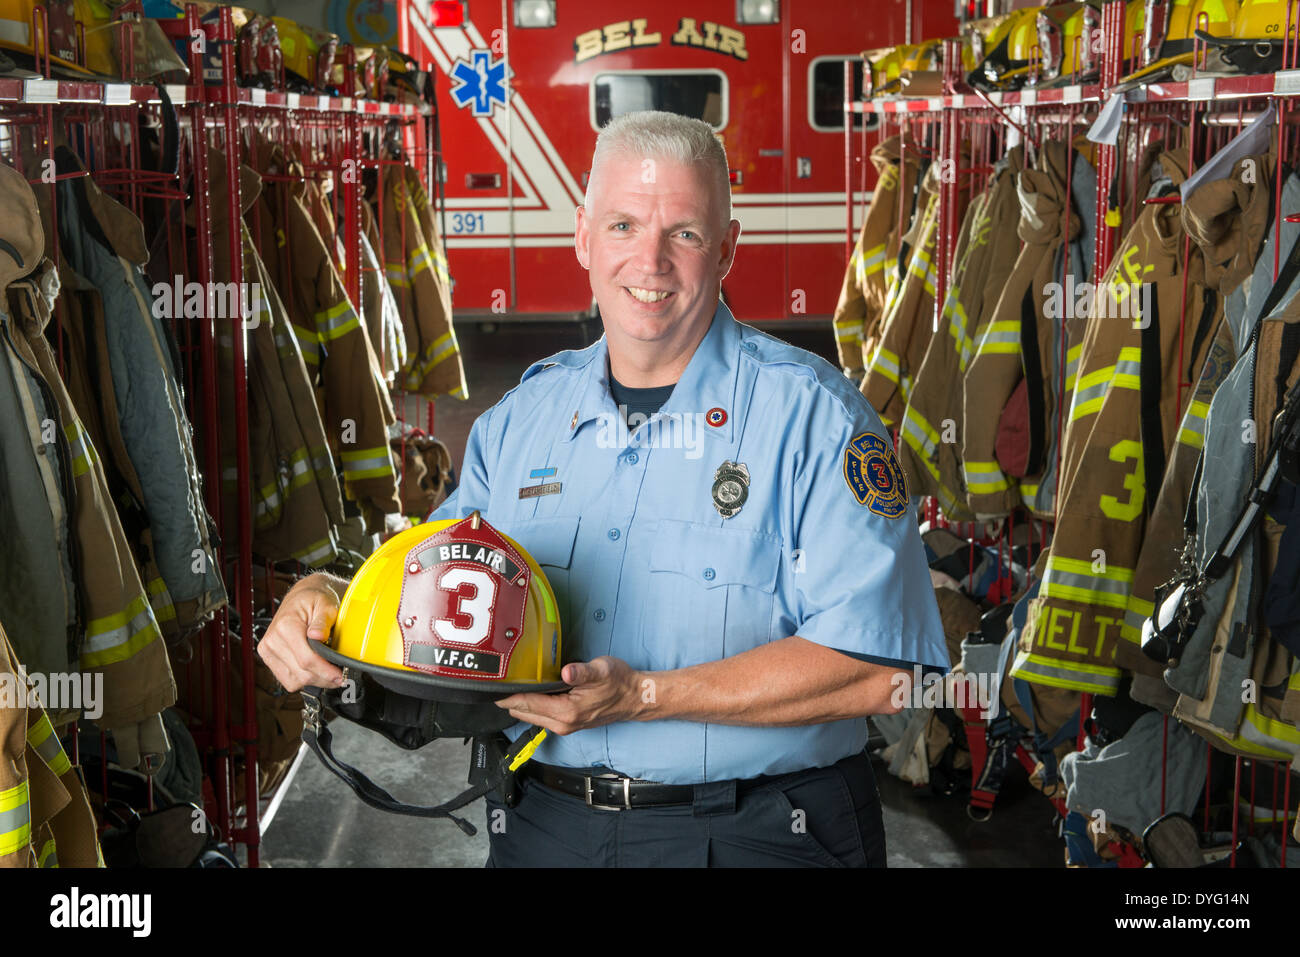 Fire fighter portrait Maryland Stock Photo